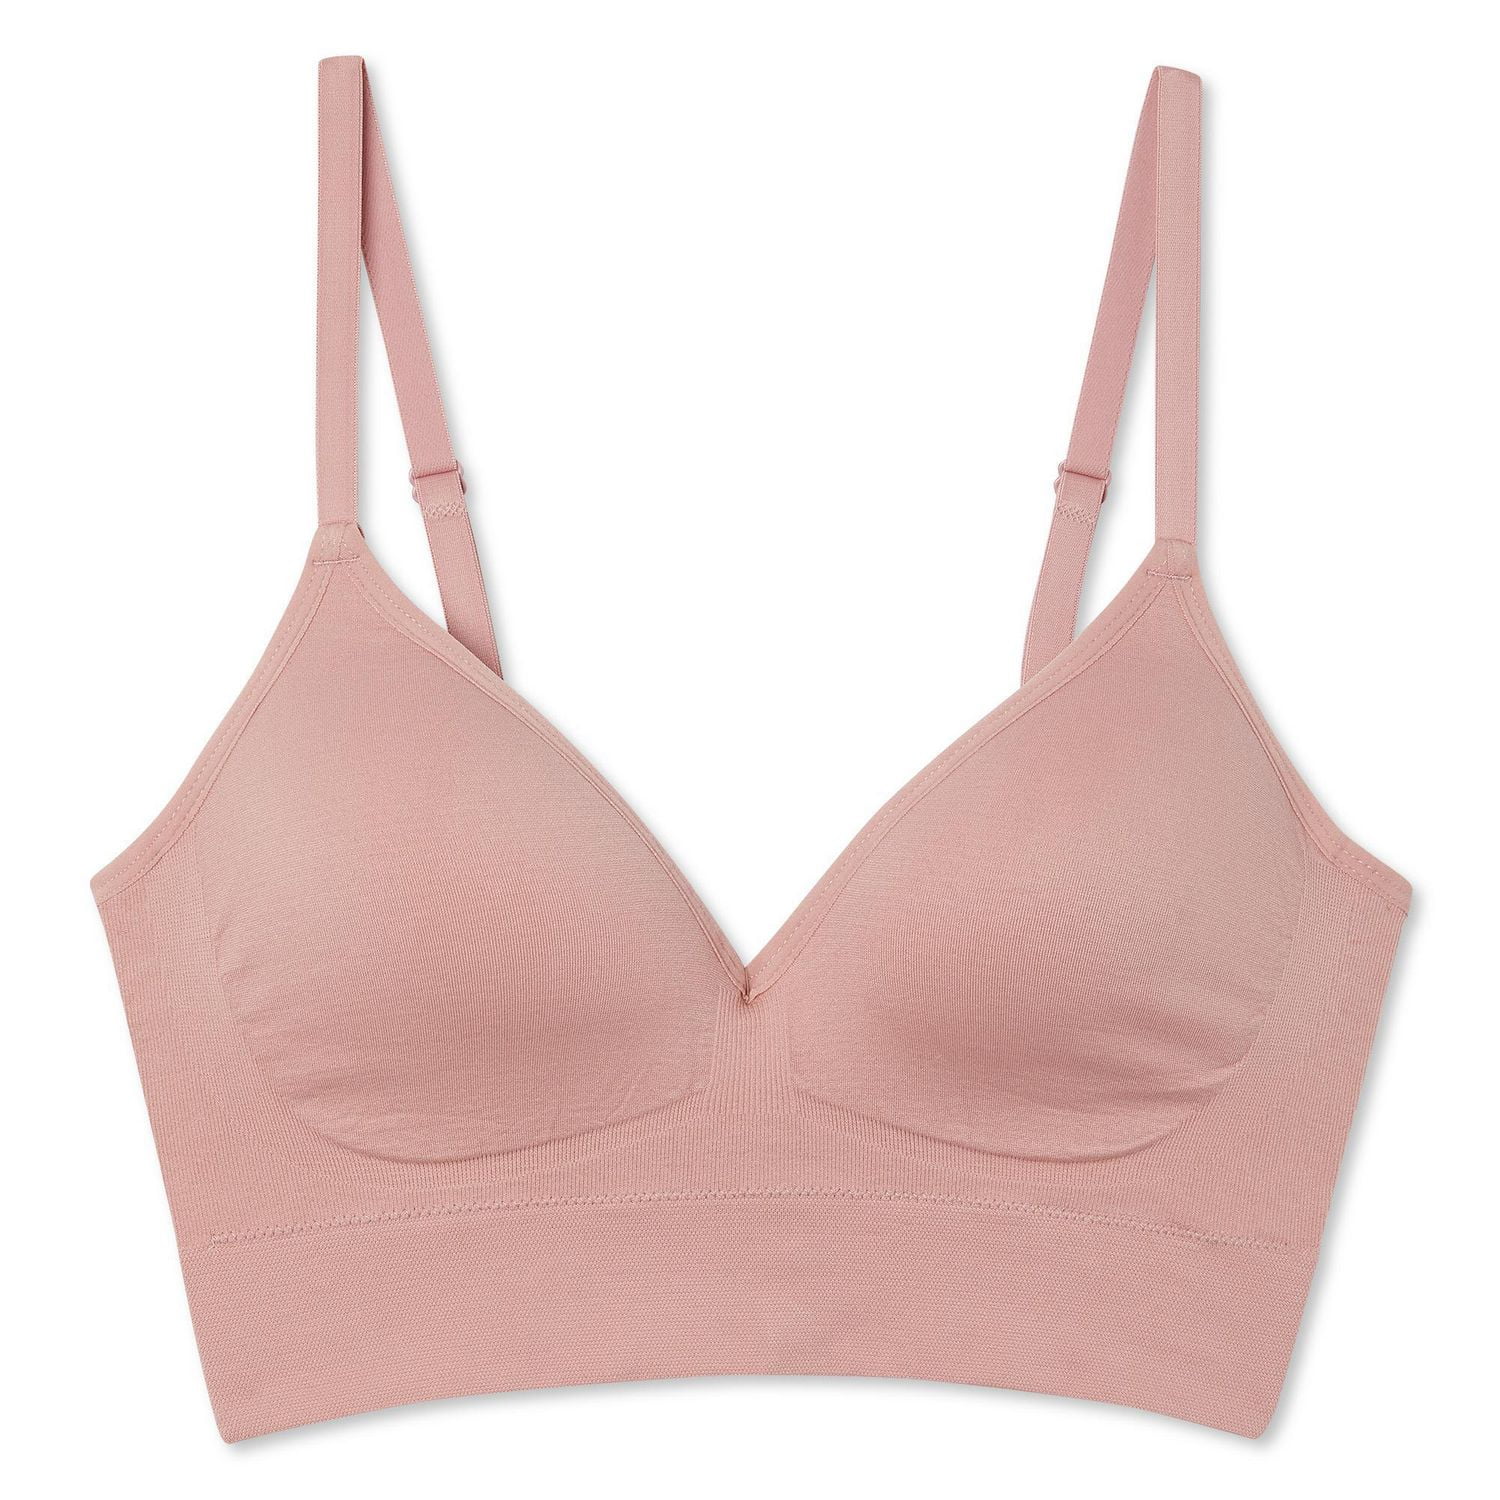 George Women's Padded Underwire T-Shirt Bra, Sizes 34A-40D